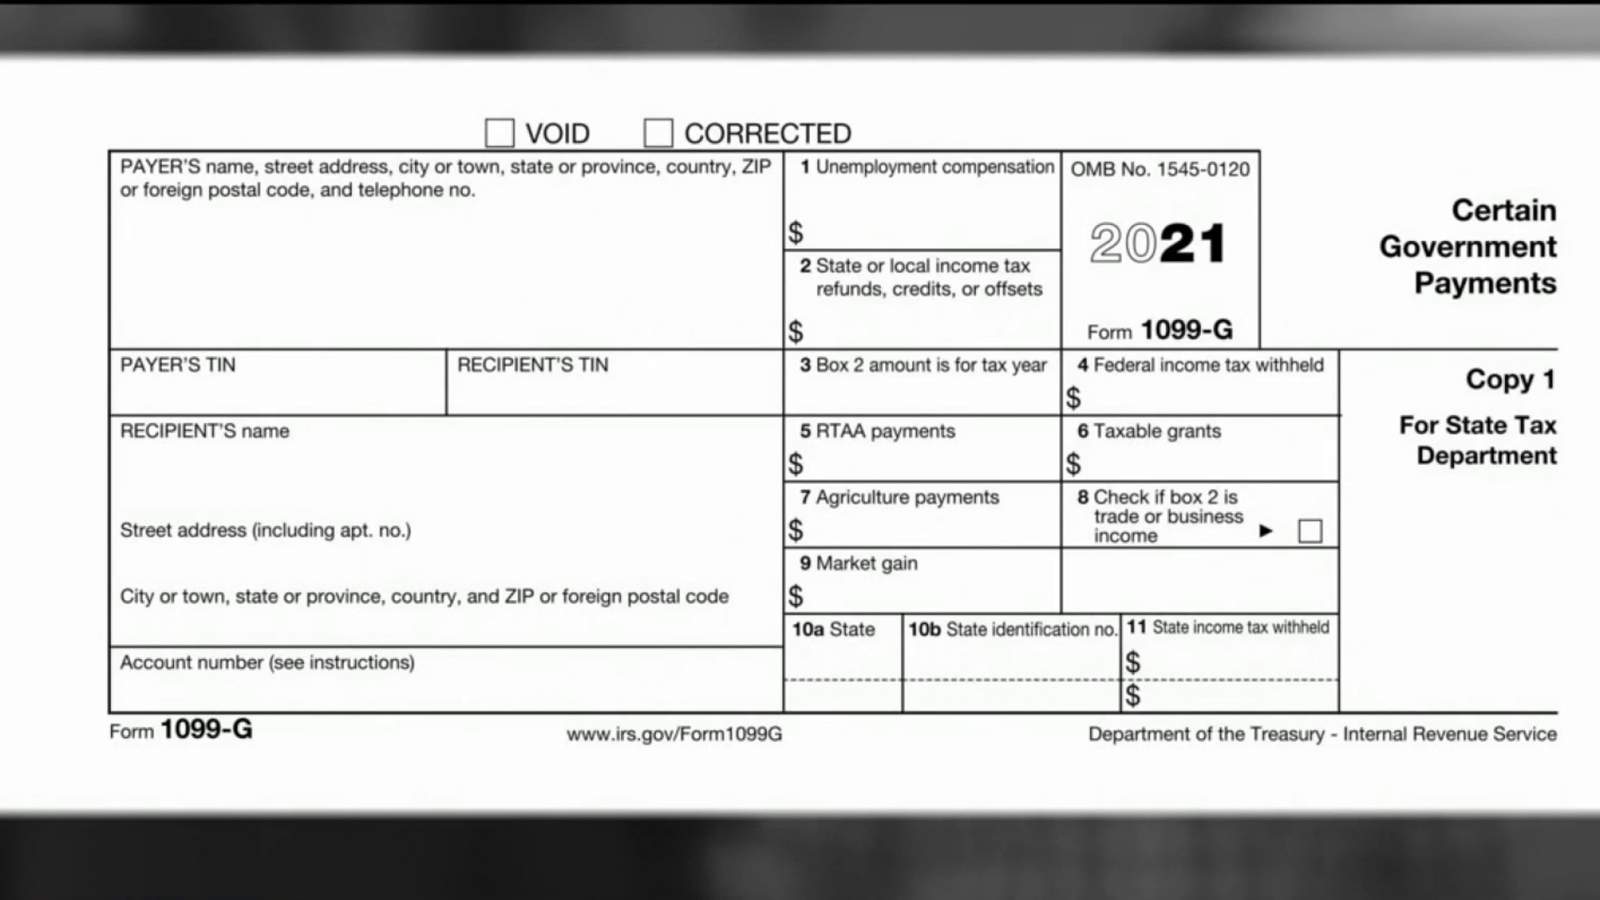 1099-G tax forms being sent to Michiganders who didn’t file for unemployment